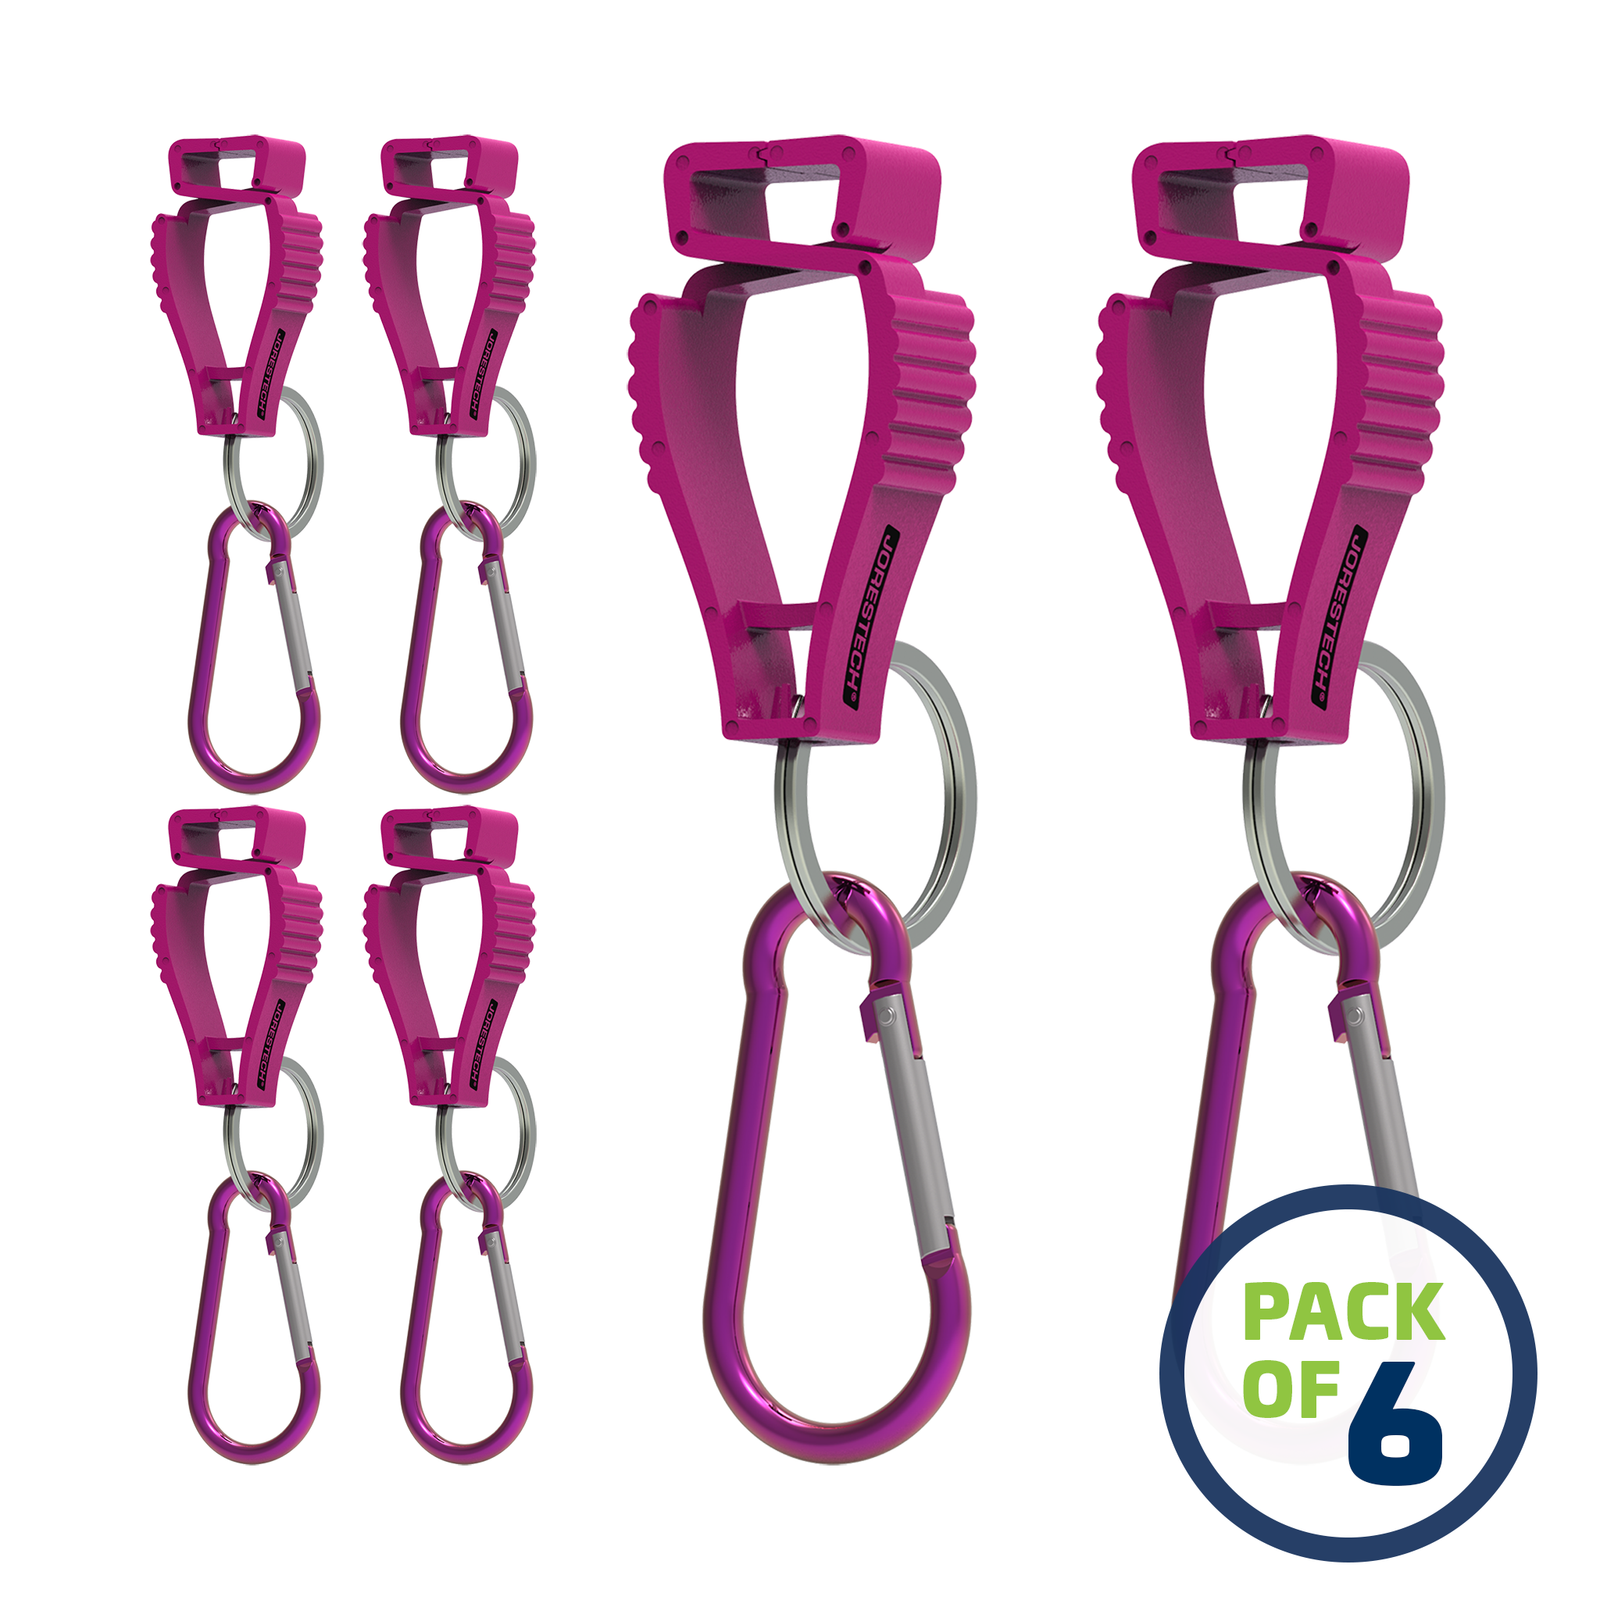 Pack of 6 Pink JORESTECH glove clip safety holders with carabiner 